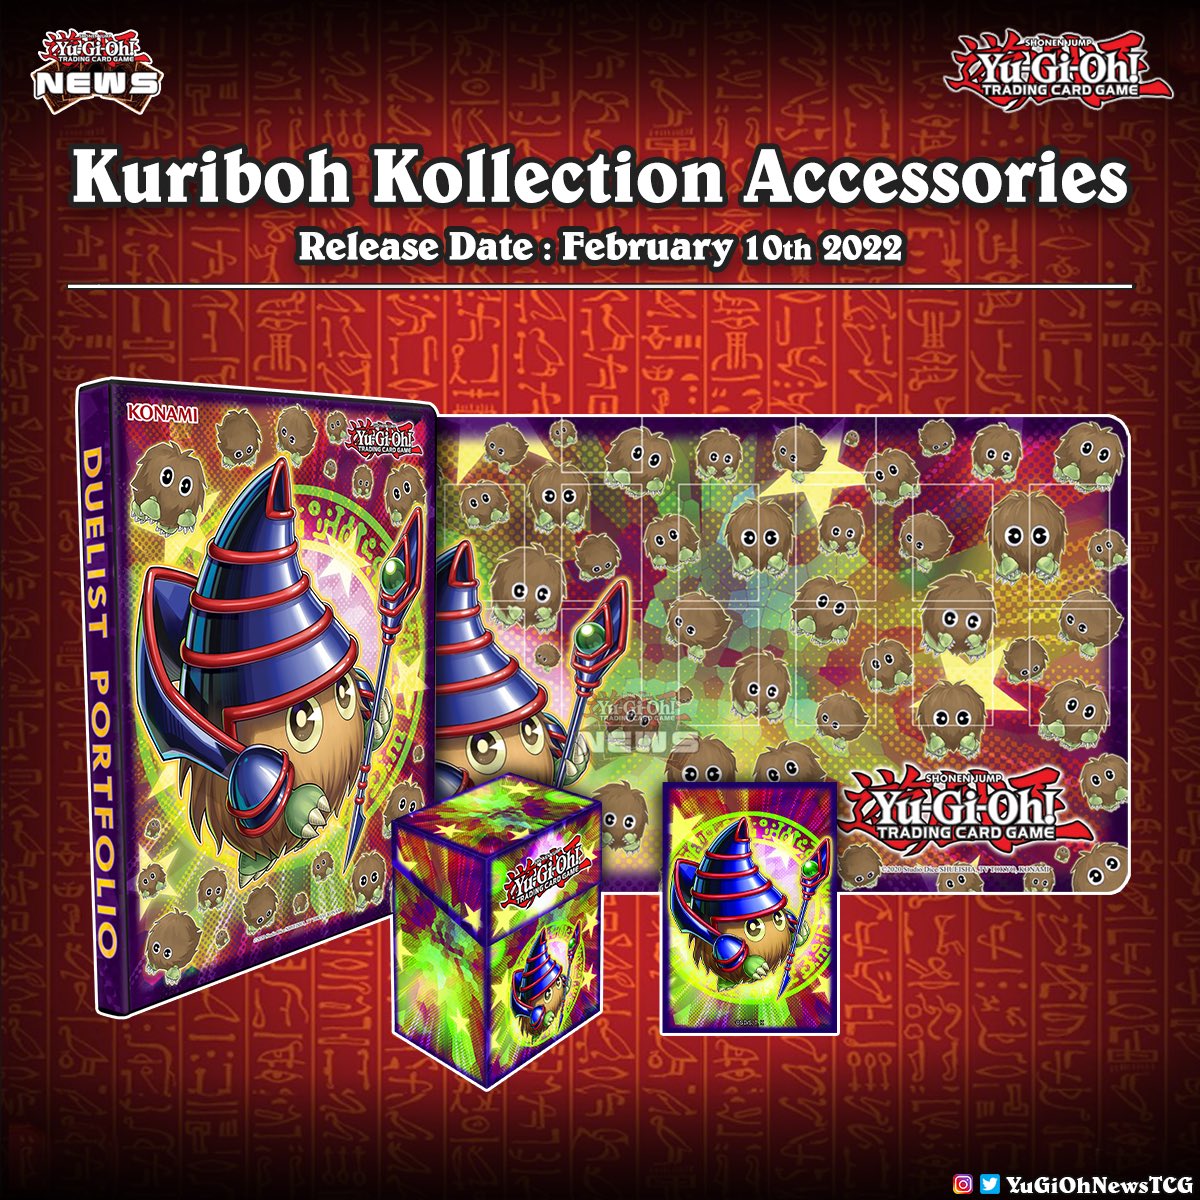 Sæbe Kejserlig lyse YuGiOh News on Twitter: "❰𝗞𝘂𝗿𝗶𝗯𝗼𝗵 𝗞𝗼𝗹𝗹𝗲𝗰𝘁𝗶𝗼𝗻❱ New YuGiOh  accessories❗️ Magikuriboh, a new member of the Kuriboh family, found in the  upcoming booster set, Battle of Chaos❗️#YuGiOh #遊戯王 #유희왕  https://t.co/JBQSPml0dc" / Twitter